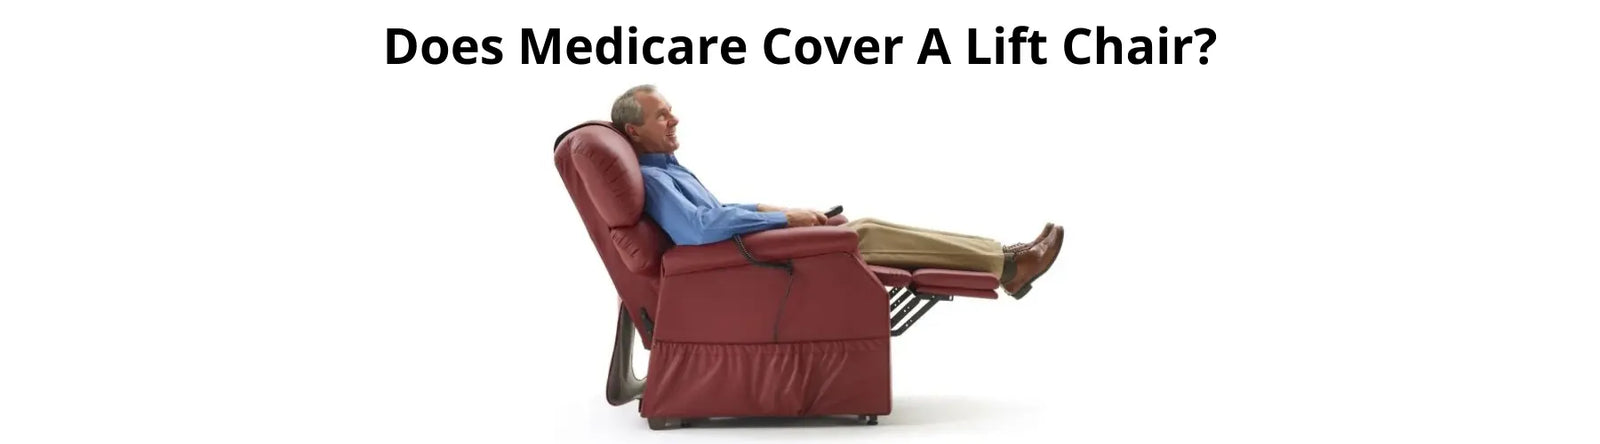 Does Medicare Cover A Lift Chair?